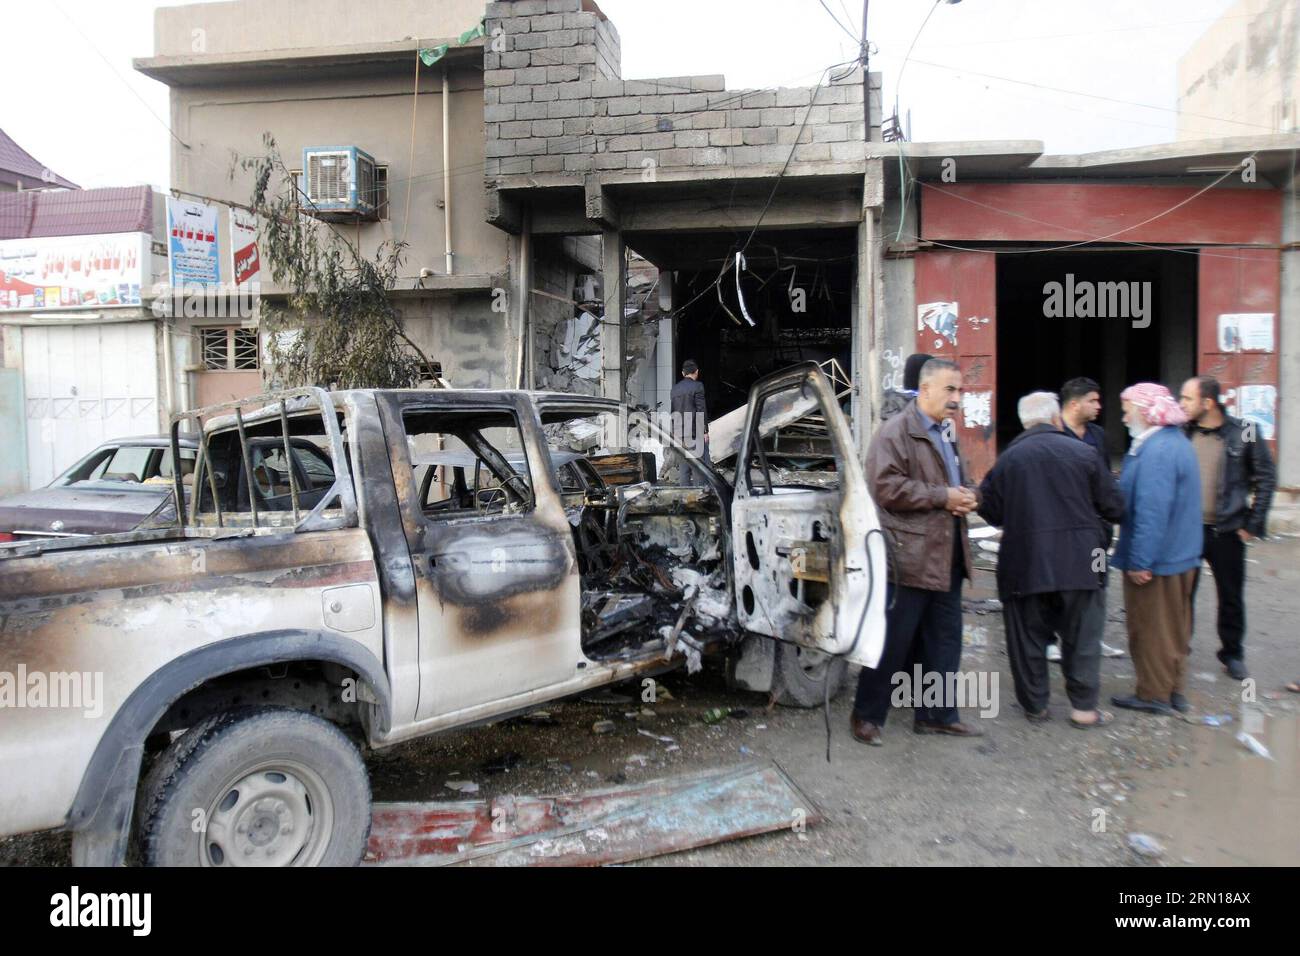 (141205) -- KIRKUK, Dec. 5, 2014 -- A damaged car is seen at an explosion site in the city of Kirkuk, Iraq, Dec 5, 2014. A suicide bomber with an explosive vest blew himself up in a cafe in the northern Iraqi city of Kirkuk, killing at least 15 people and wounding 20 others on Dec. 4, a local police told Xinhua on condition of anonymity. )(bxq) IRAQ-KIRKUK-SUICIDE BOMB DenaxAssad PUBLICATIONxNOTxINxCHN   Kirkuk DEC 5 2014 a damaged Car IS Lakes AT to Explosion Site in The City of Kirkuk Iraq DEC 5 2014 a Suicide Bombers With to Explosive Vest blew himself up in a Cafe in The Northern Iraqi Cit Stock Photo